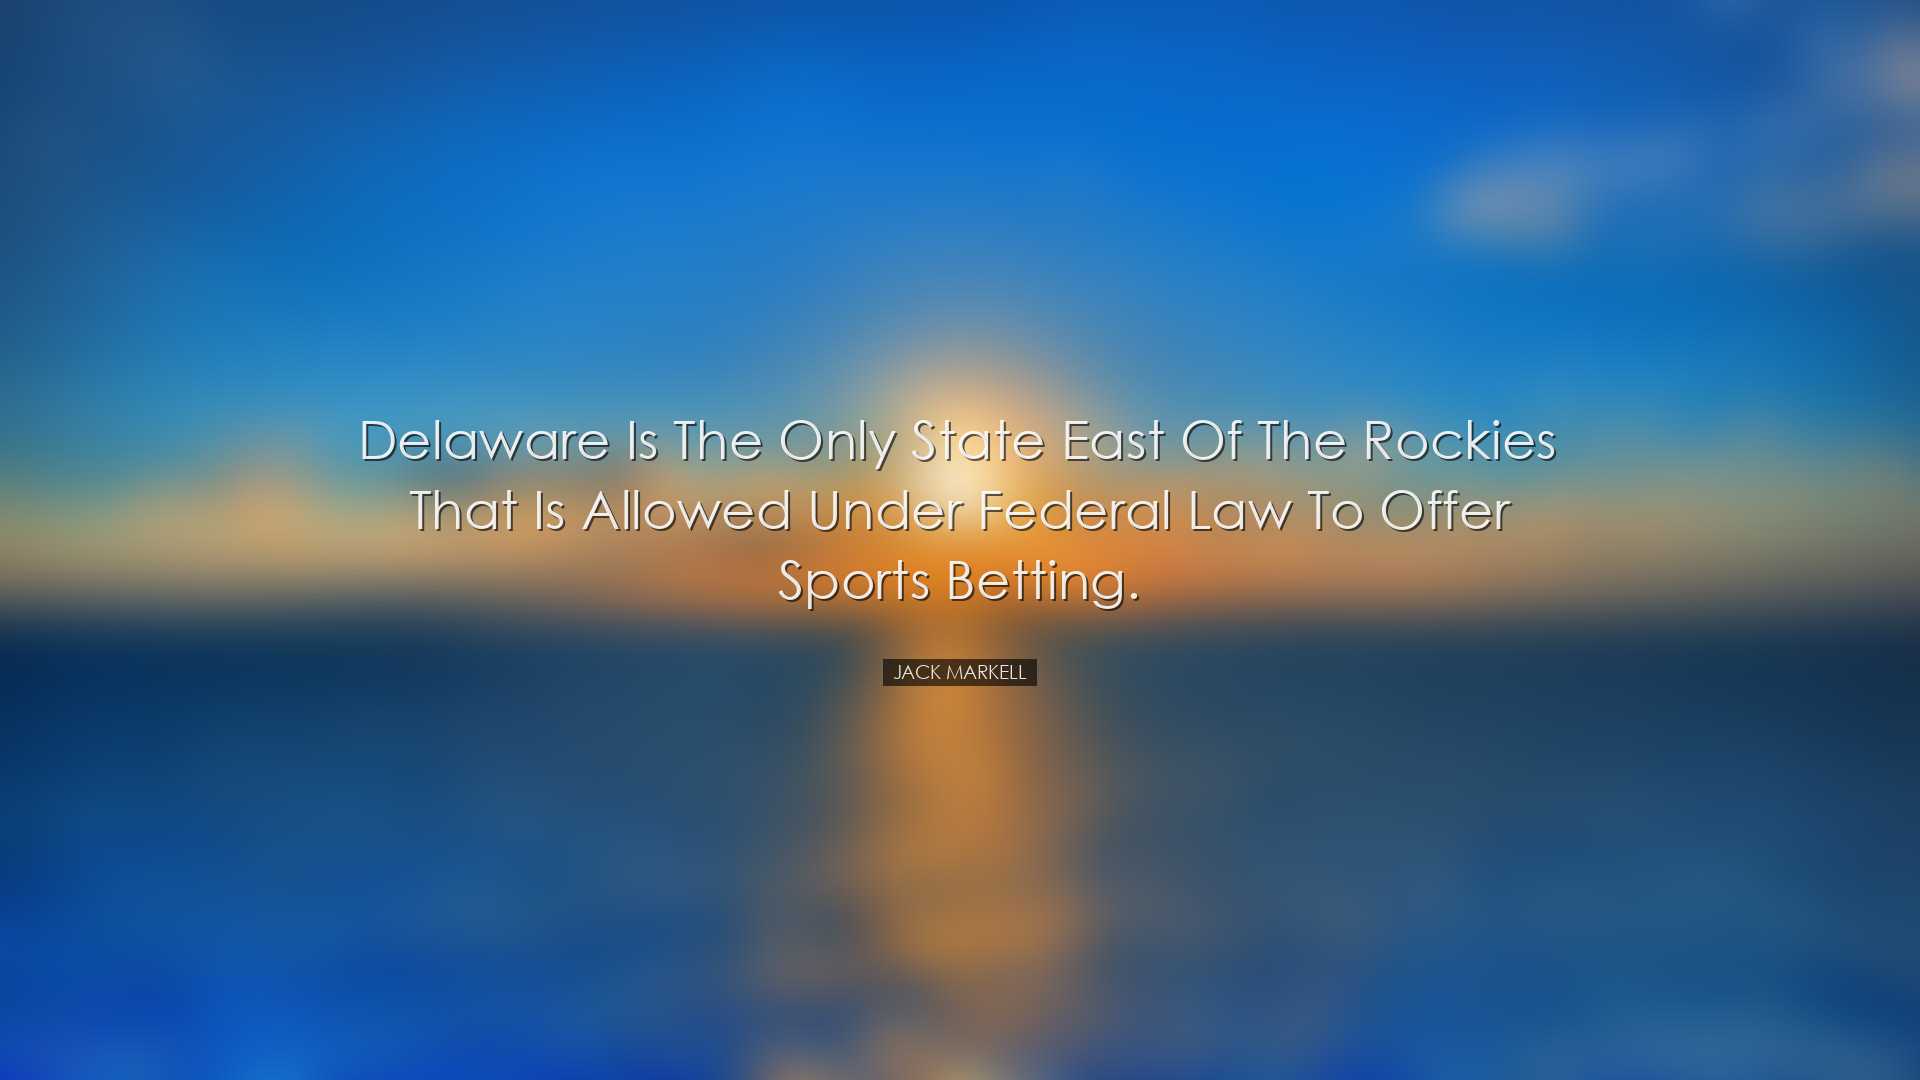 Delaware is the only state east of the Rockies that is allowed und